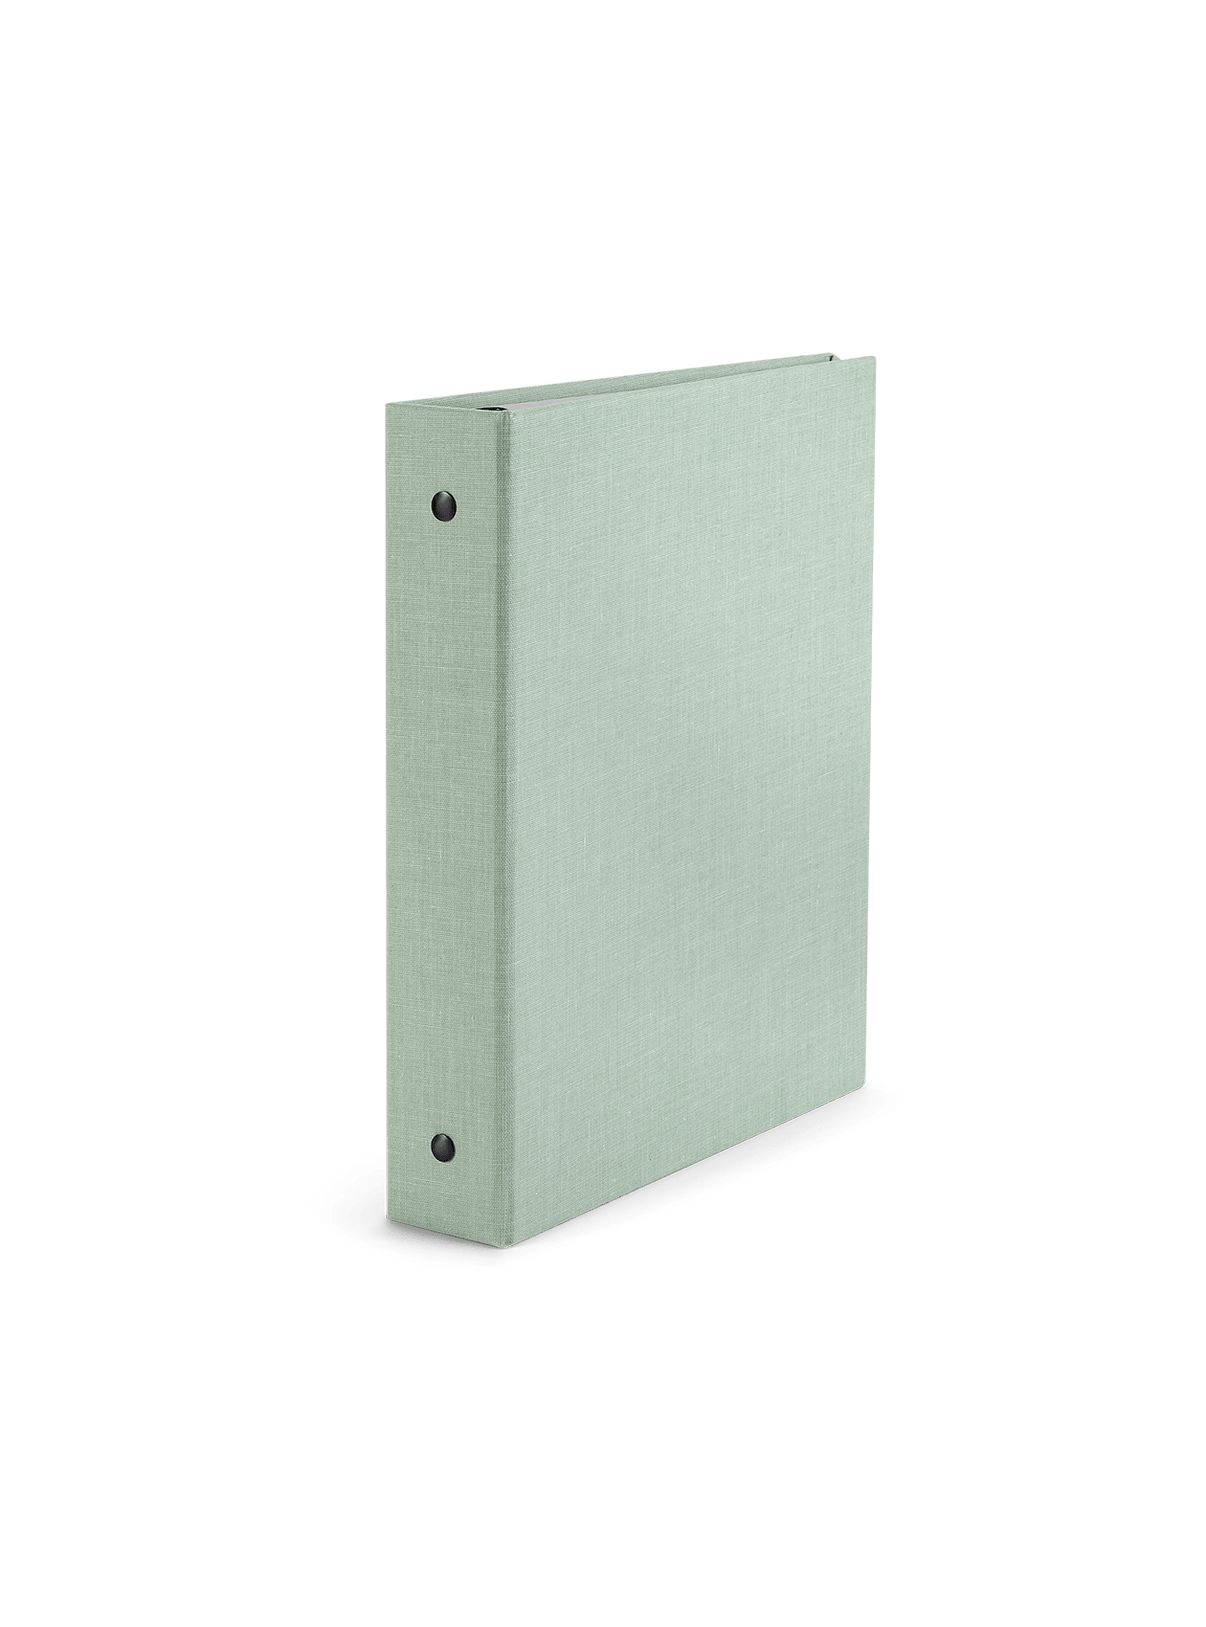 The Appointed 24-25 Daily Planner in Mineral Green standing up